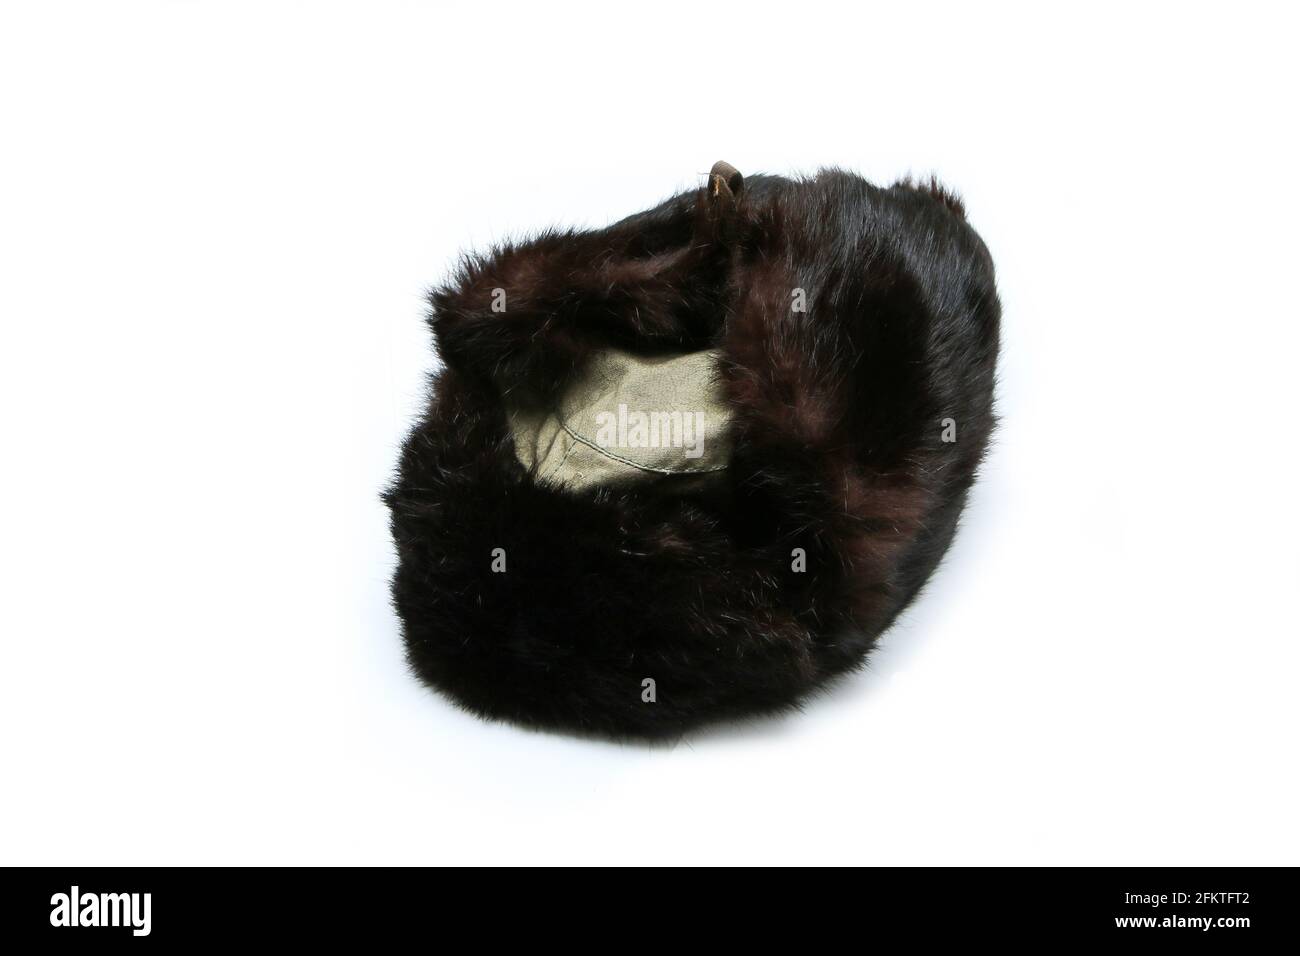 The old unused socialist fur hat isolated on a white background. Stock Photo